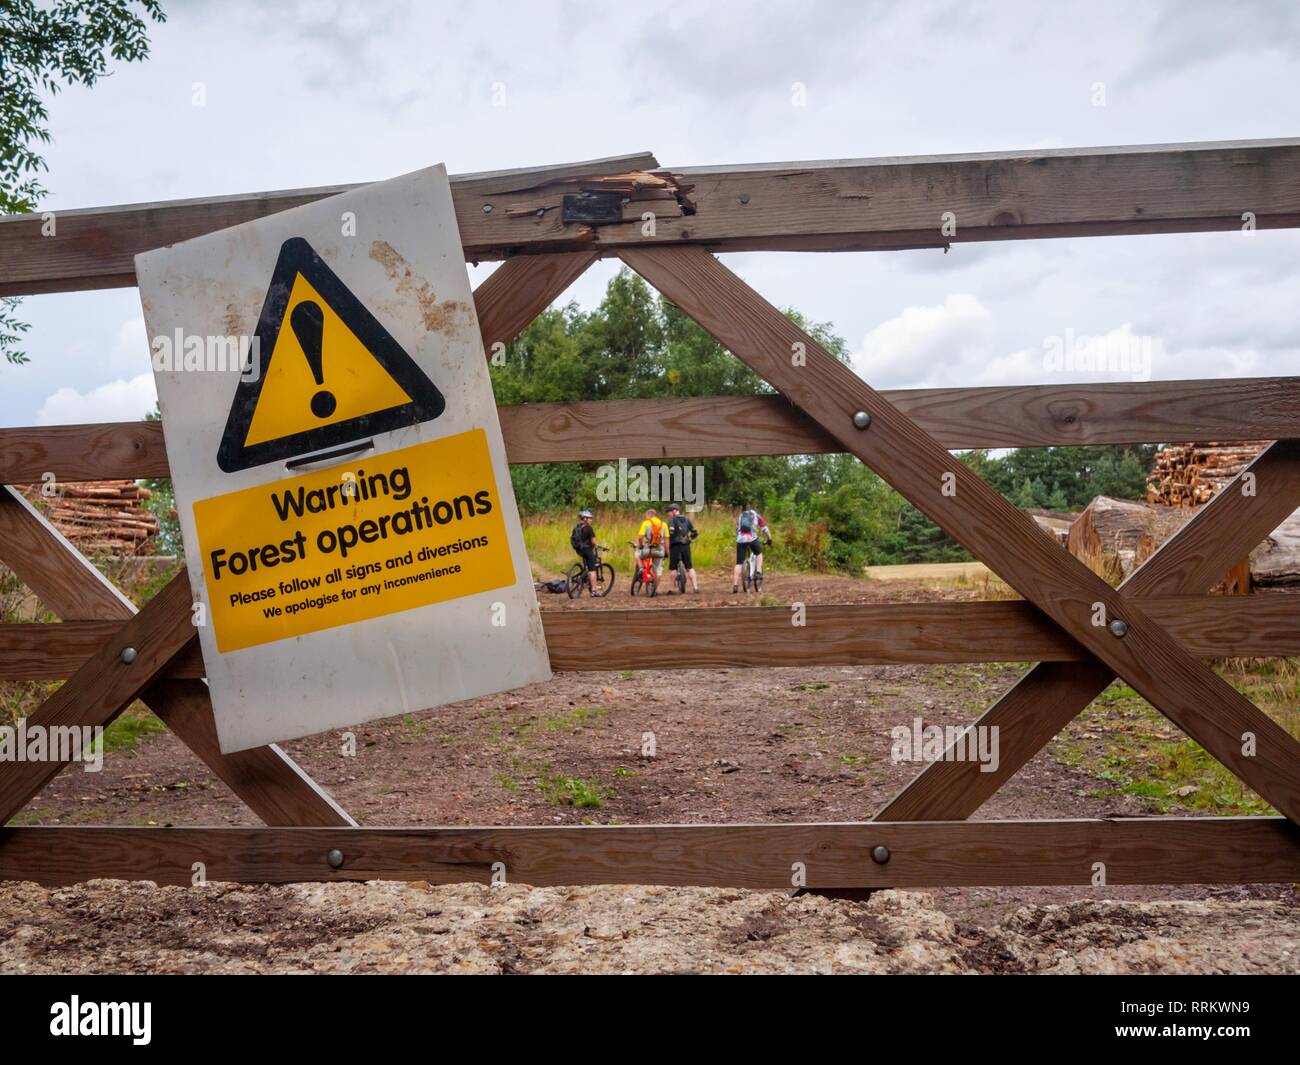 Mountain bikers ignore signs warning of forest operations in the surrounding area. Stock Photo